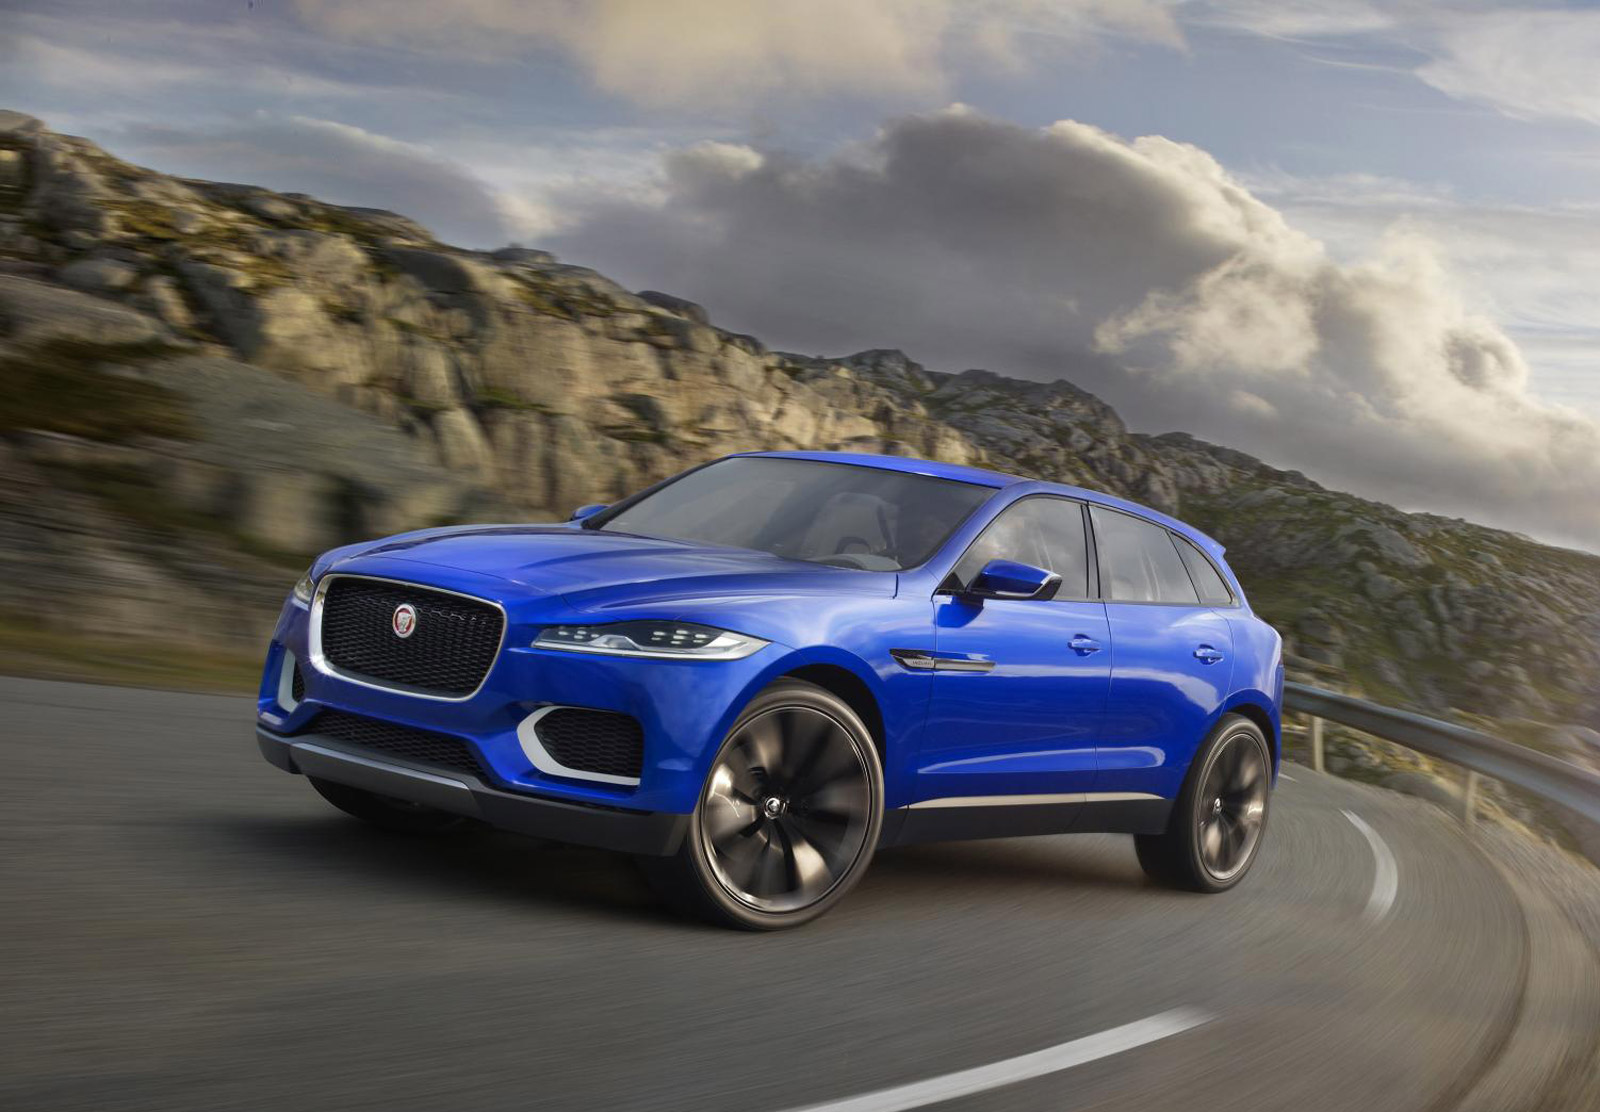 Jaguar To Expand Lineup With Four New Models By 2018 Report